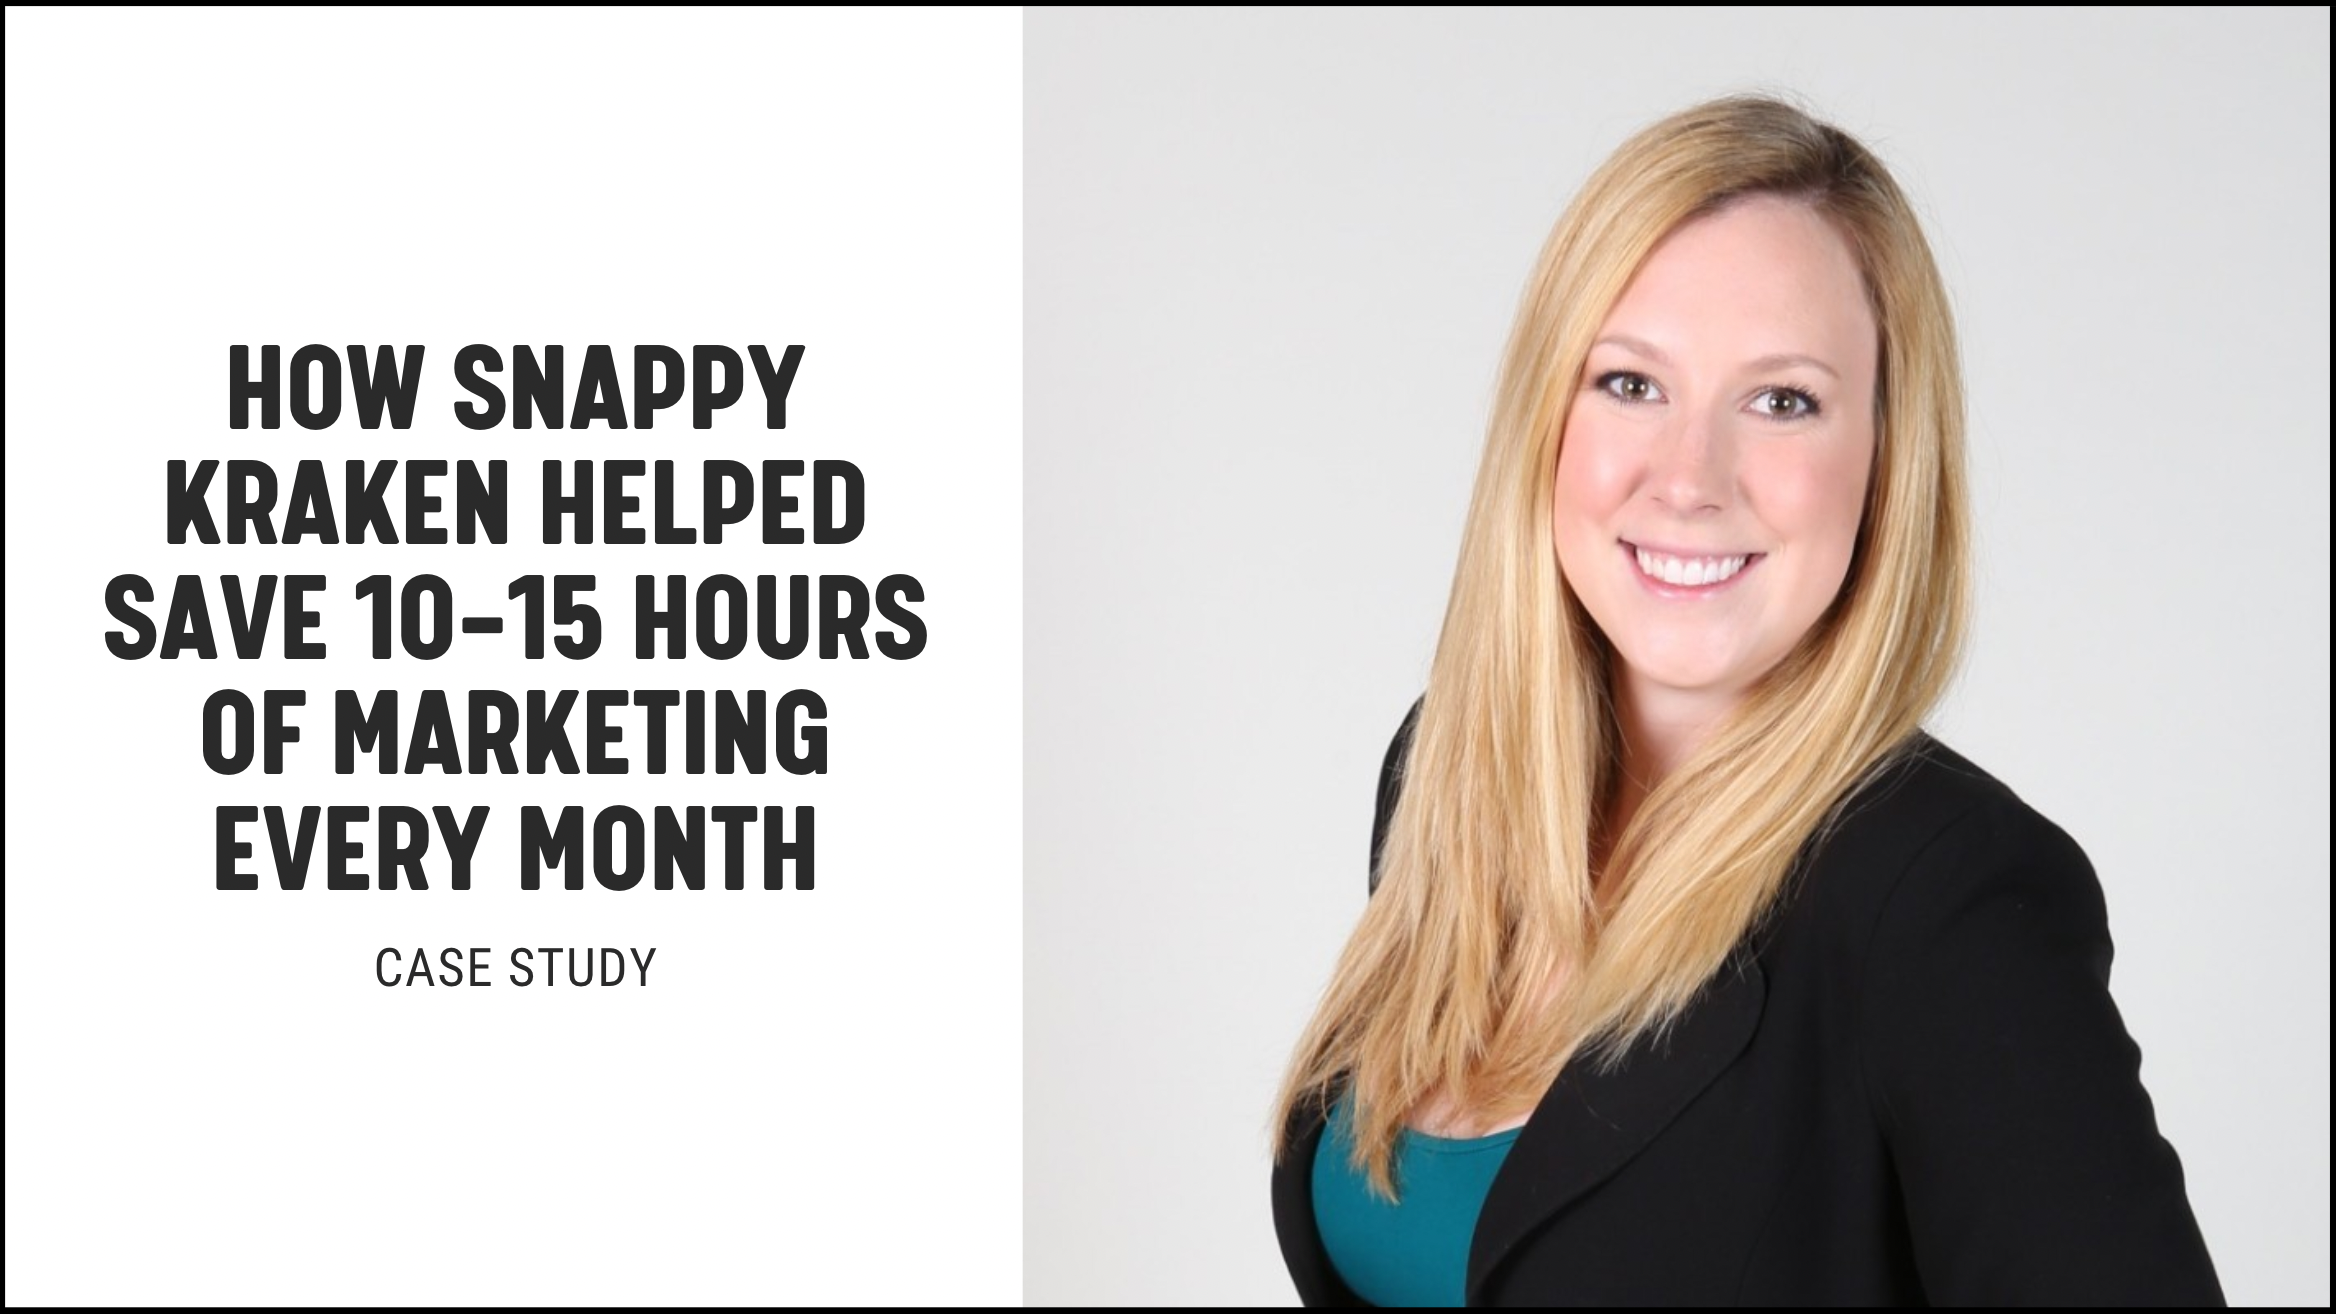 Case Study: How Snappy Kraken Helped Save 10-15 Hours of Marketing Every Month